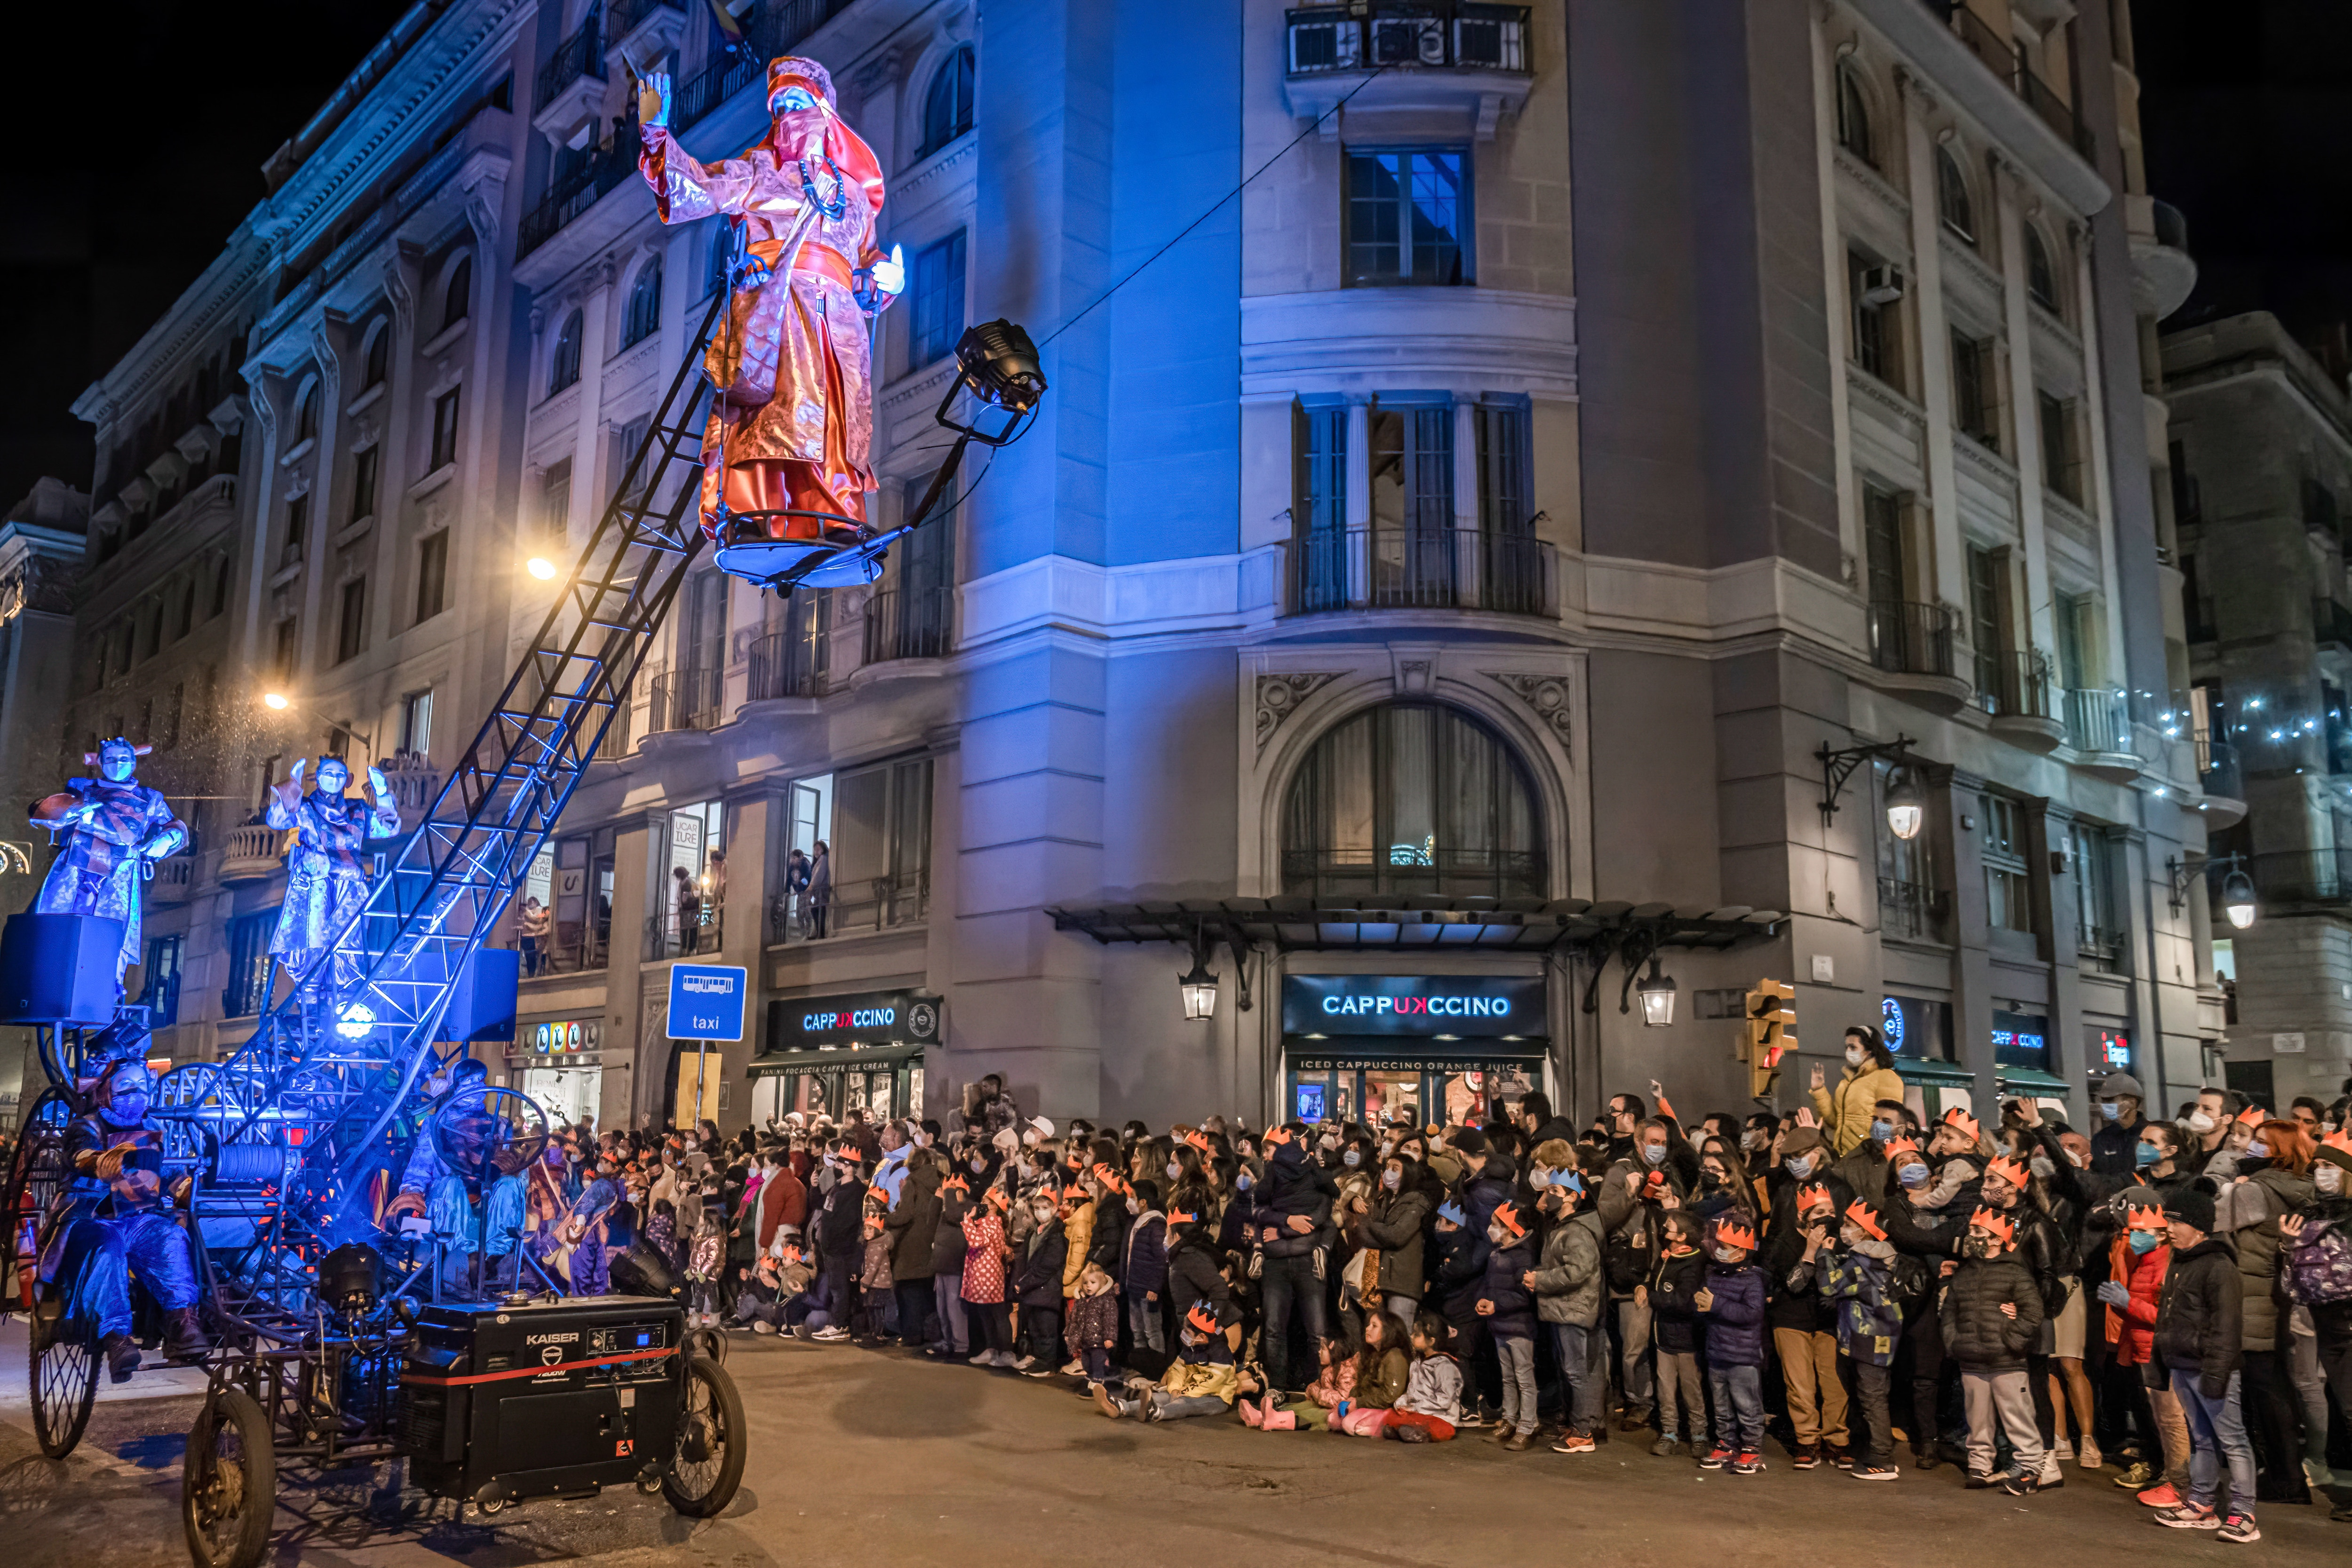 A royal carriage is seen in Via Laietana during the procession of the Magi from the East.Within the tradition of the Christmas festivities, the traditional procession of the Three Wise Men from the East has taken place in the streets of Barcelona. 